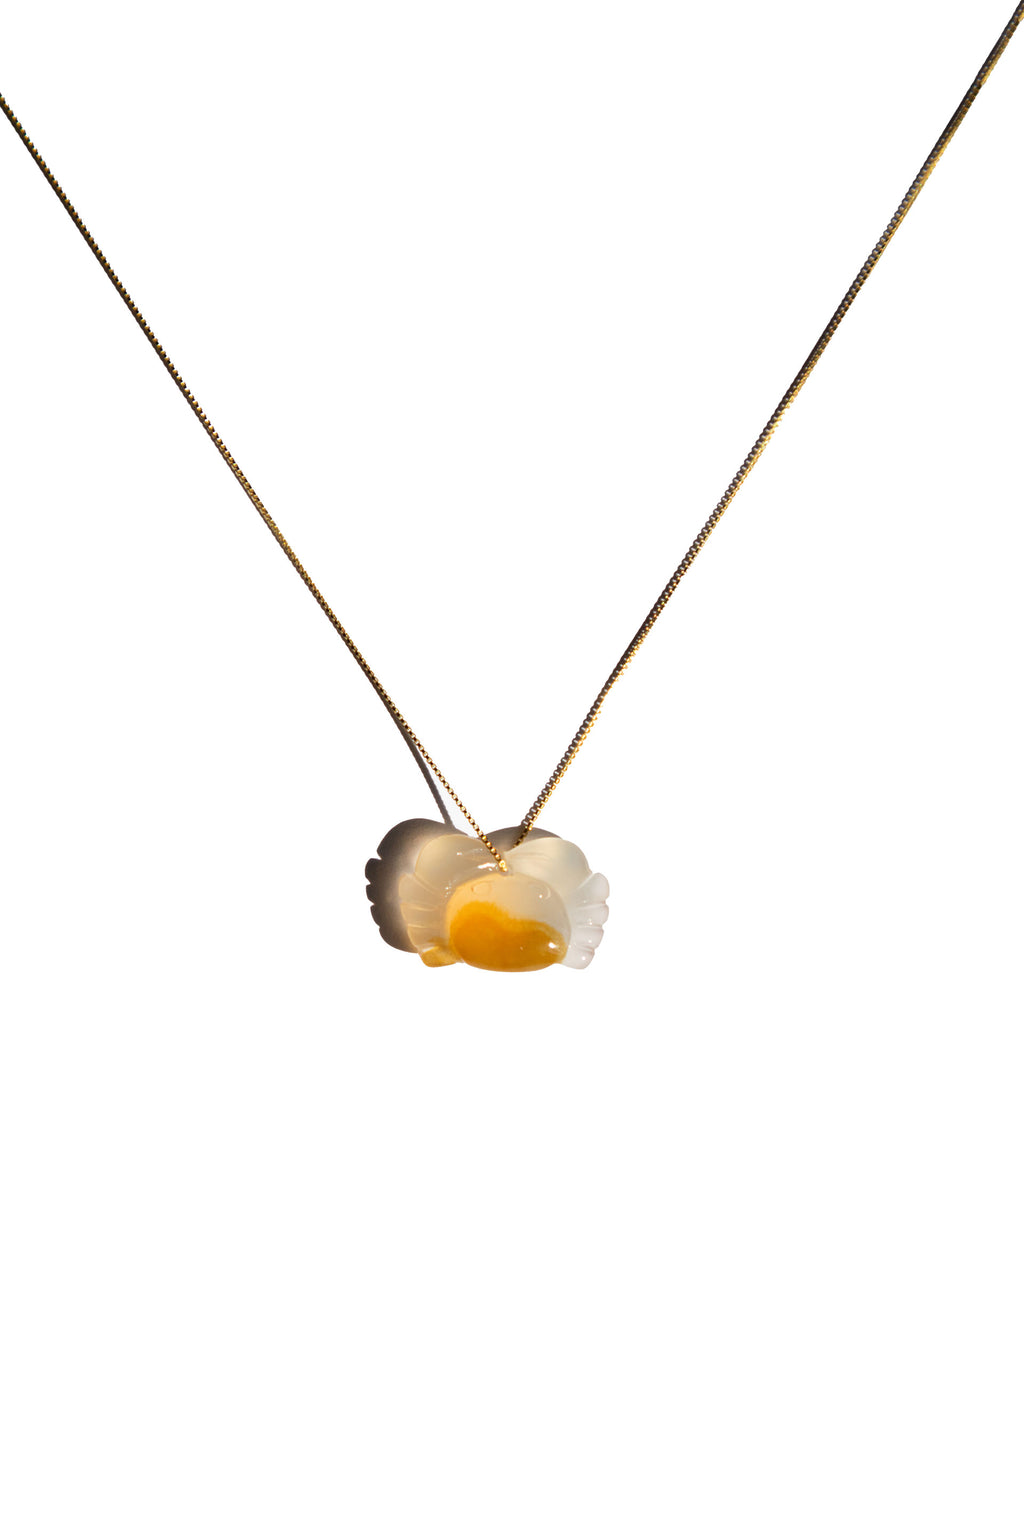 seree-zodiac-collection-cancer-necklace-crab-shape-chalcedony-pendant